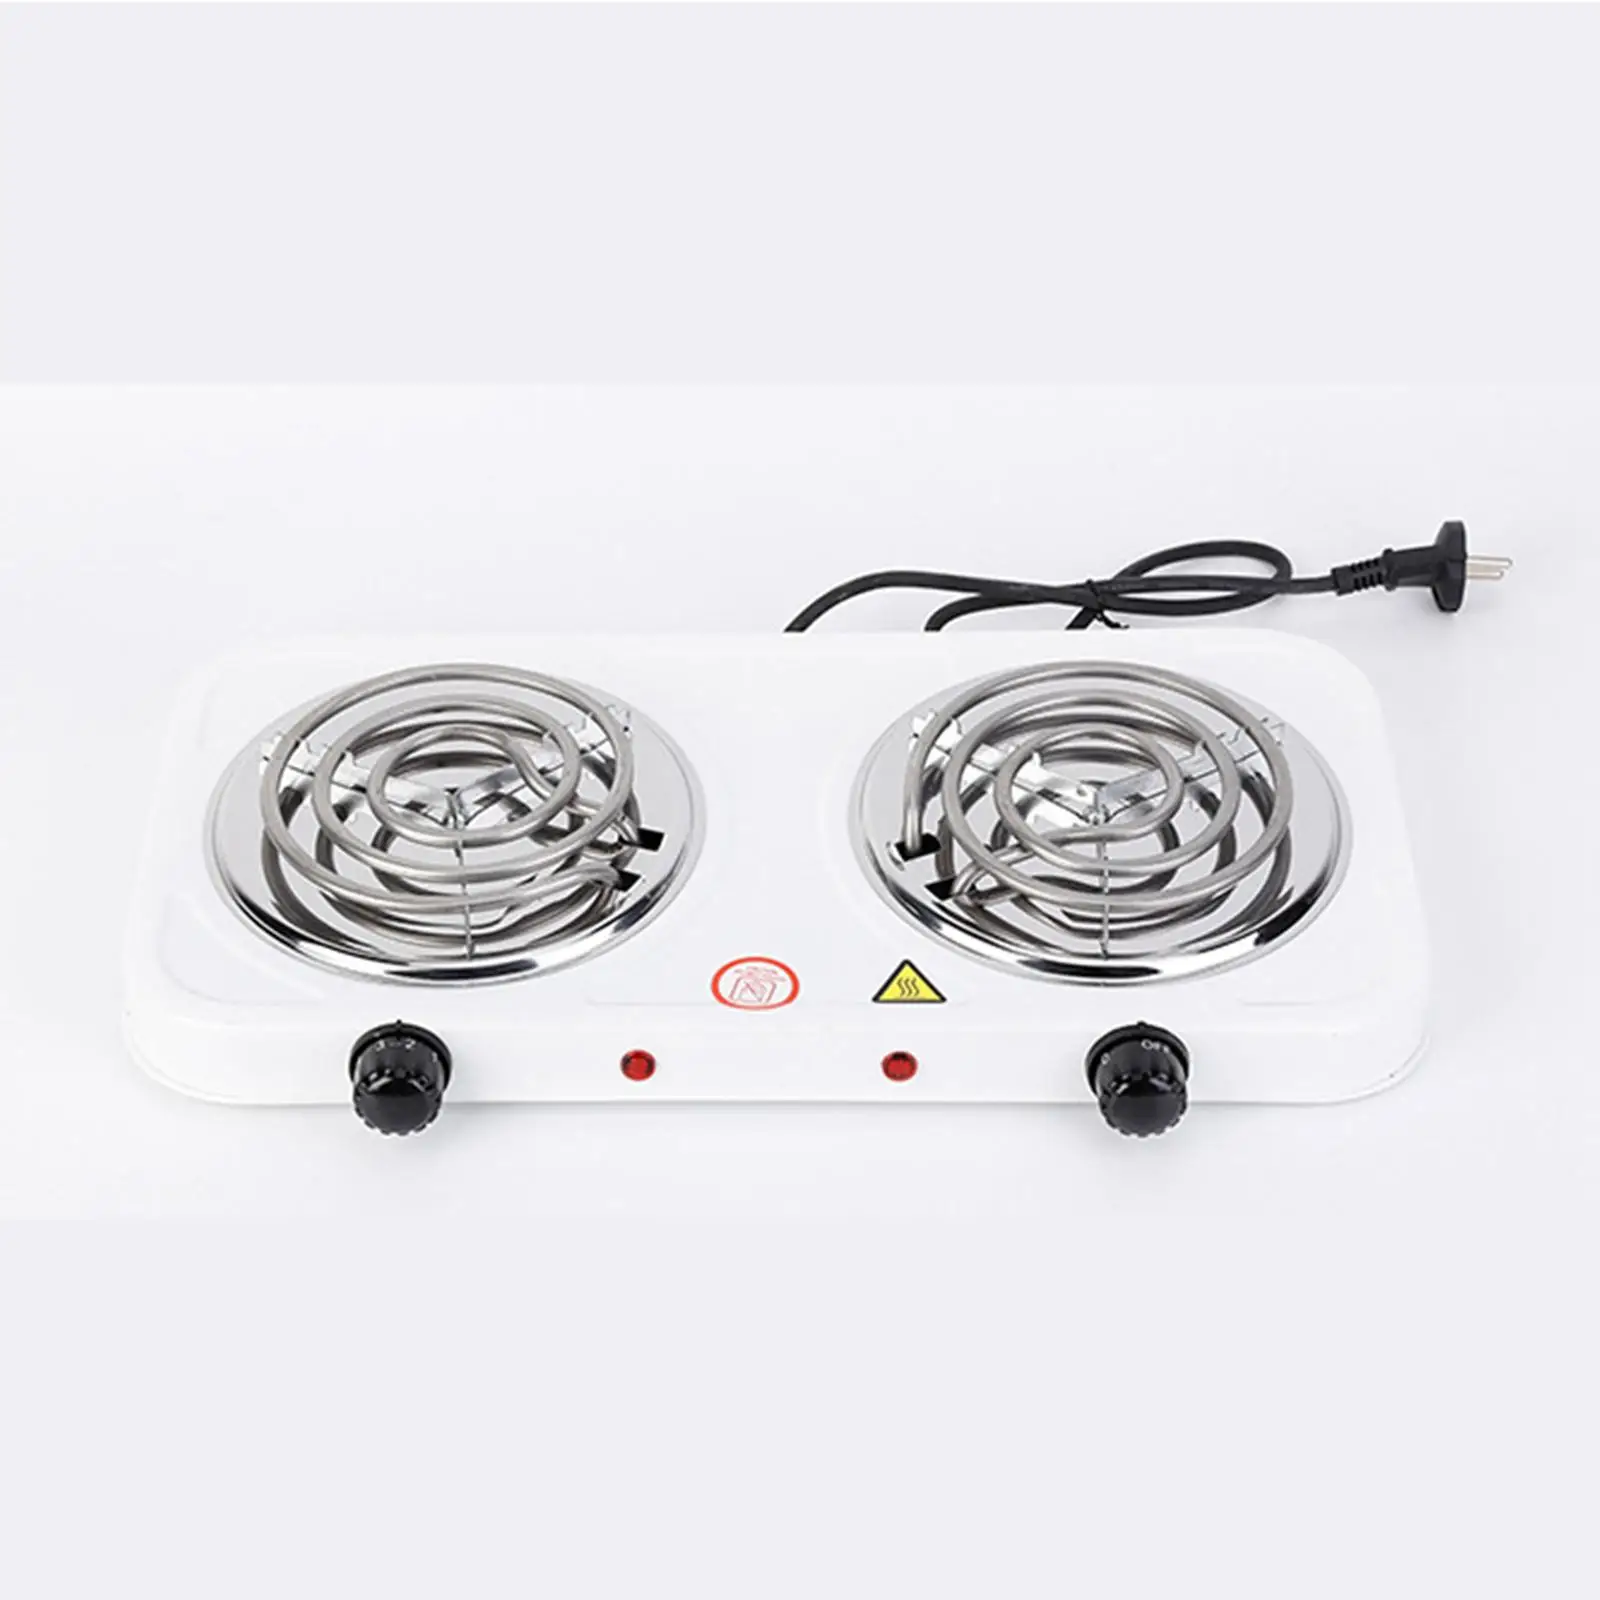 Electric Coil Burner 2000W Hotplate Easy to Clean Home Outdoor Adjustable Temperature Hot Plate with Indicator Lights Practical